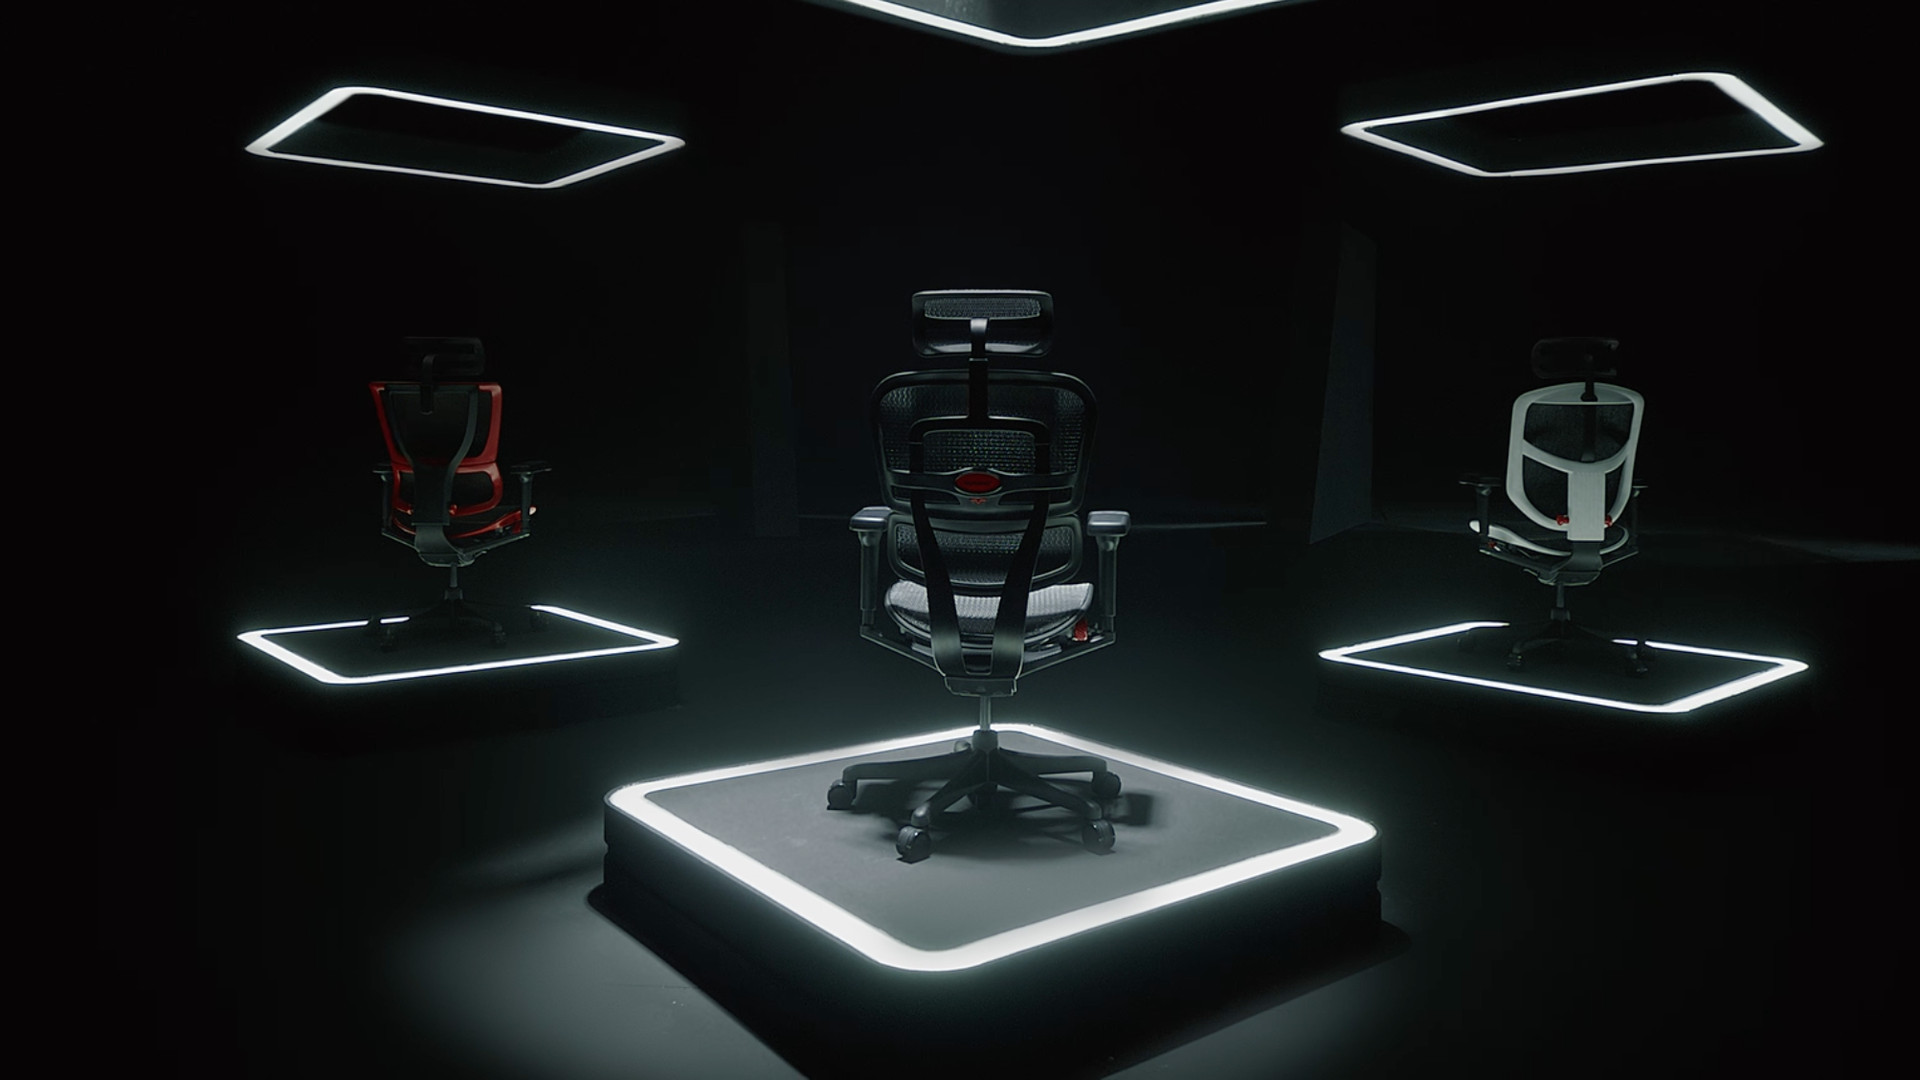 Three Ergohuman gaming chairs, each on a pedestal in 3 different colour options: red, black & white